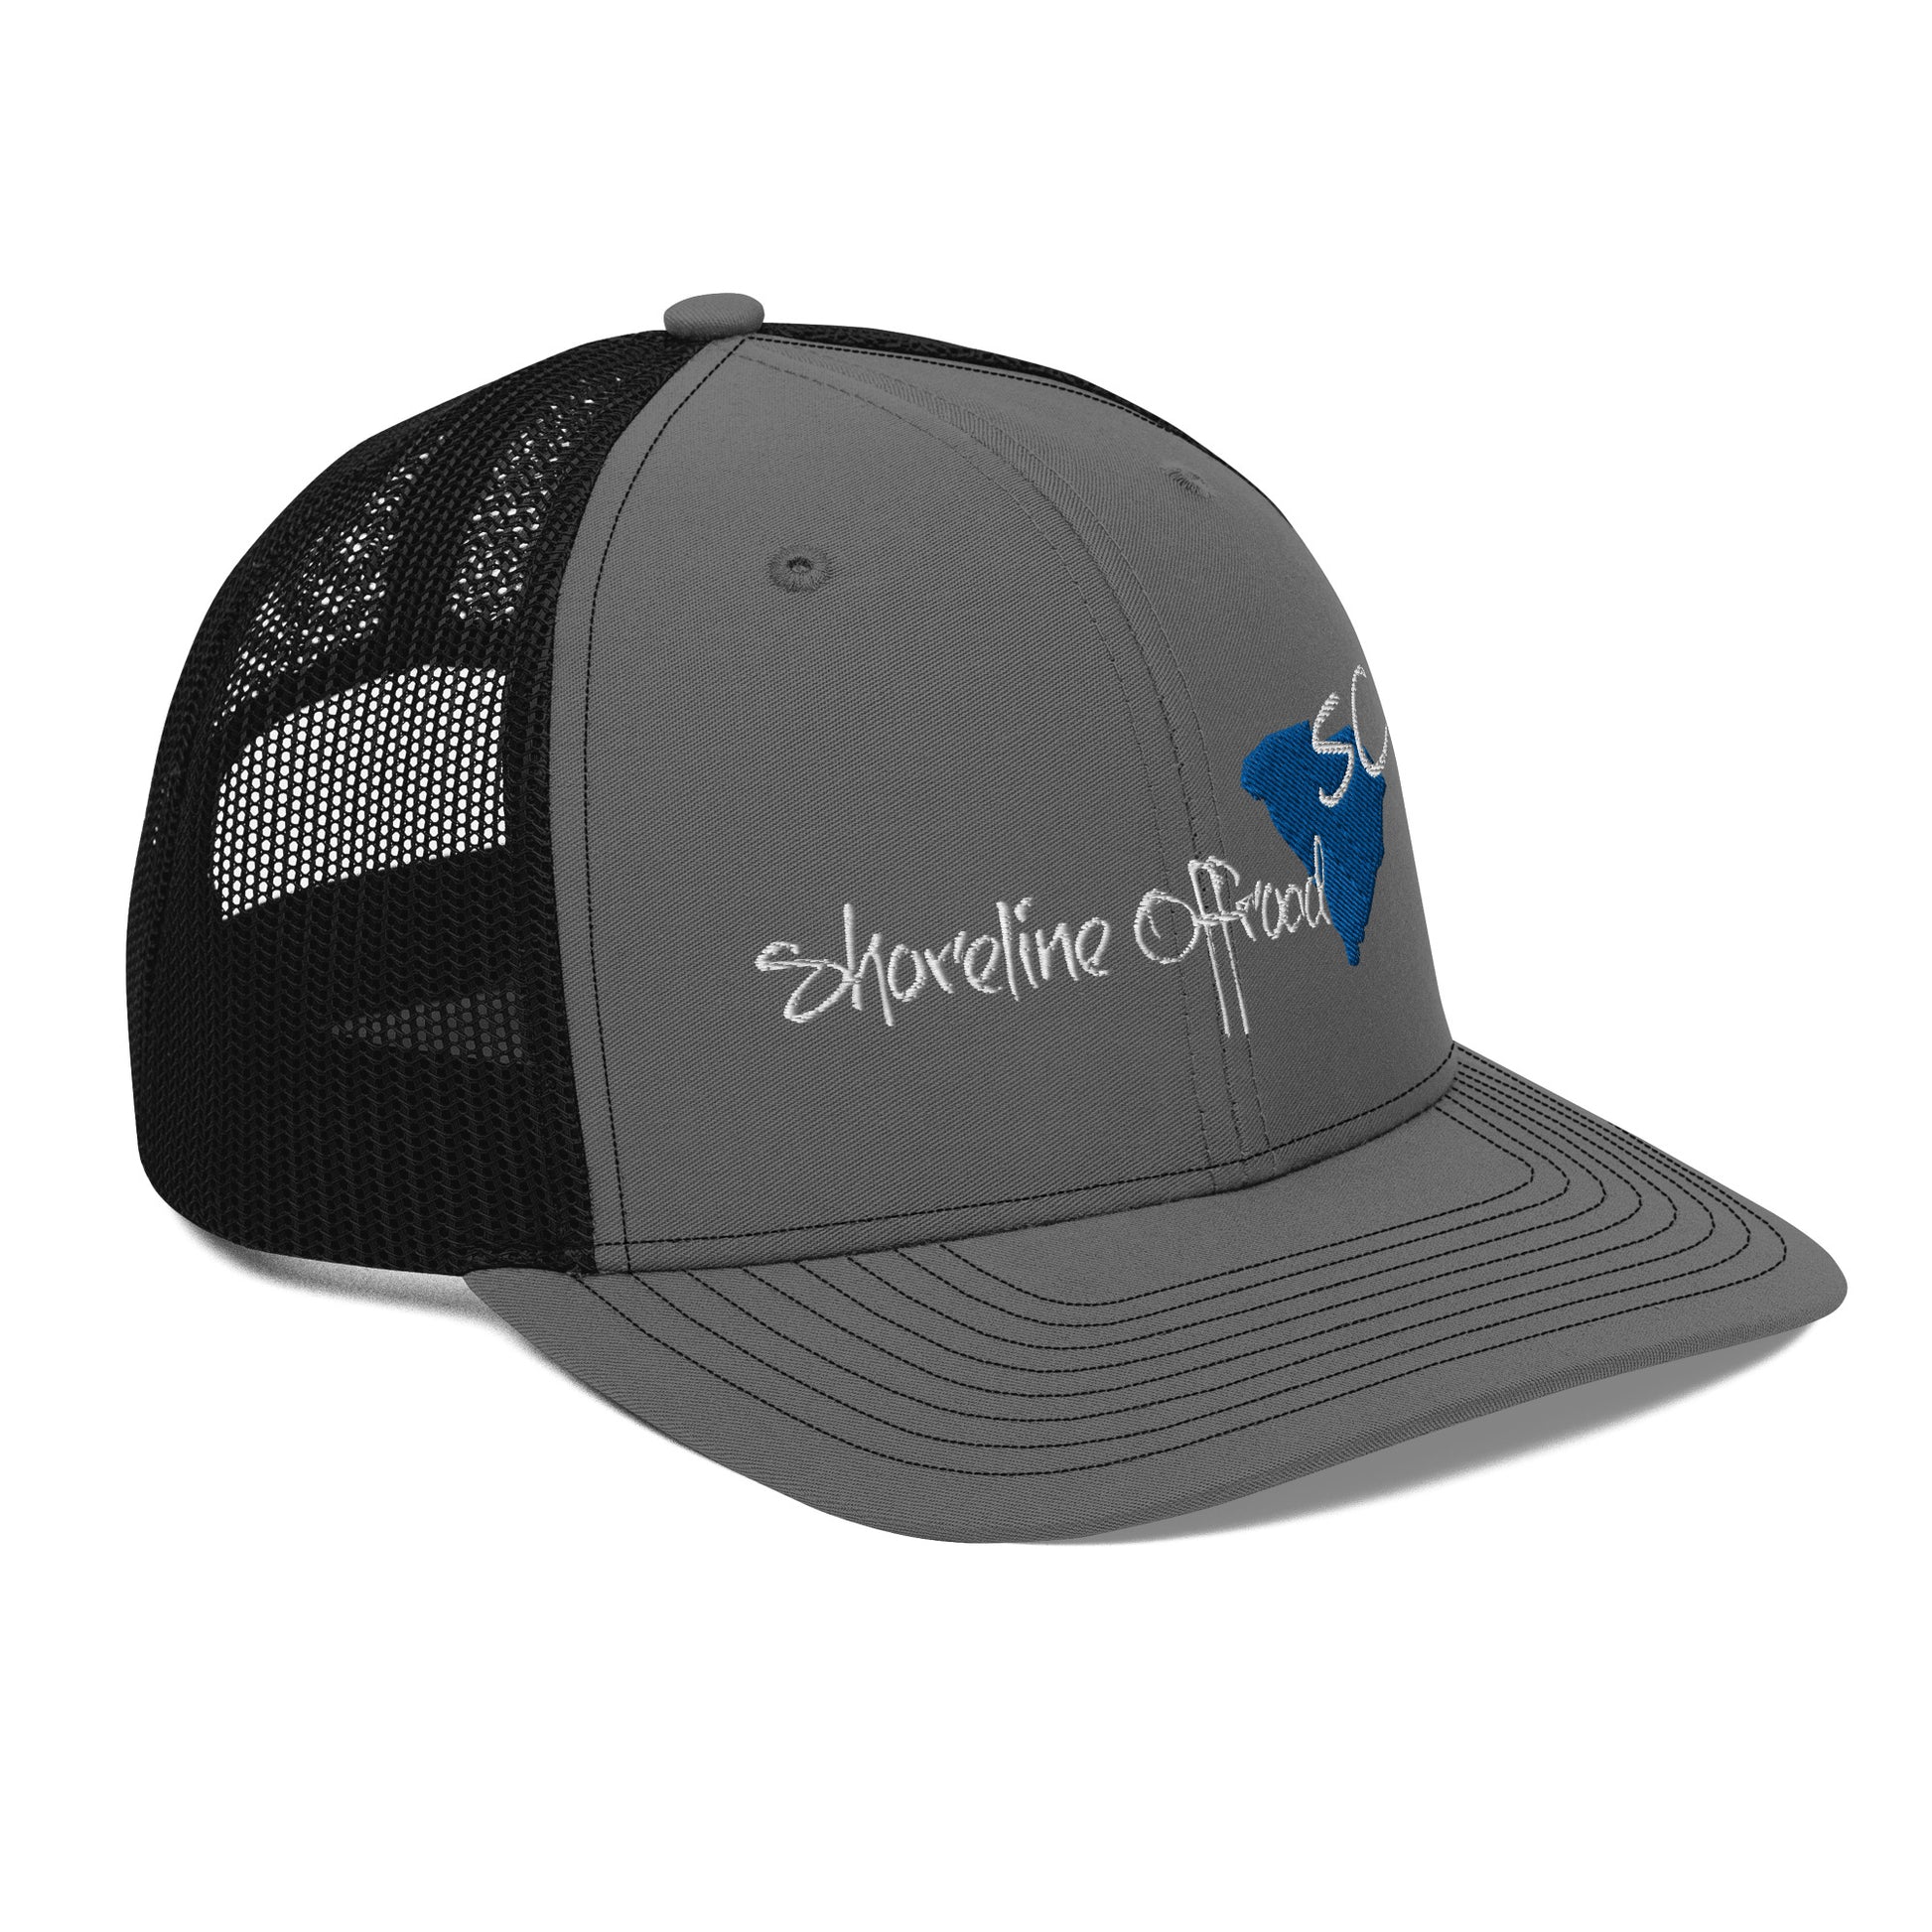 a gray and black trucker hat with a blue bird on it